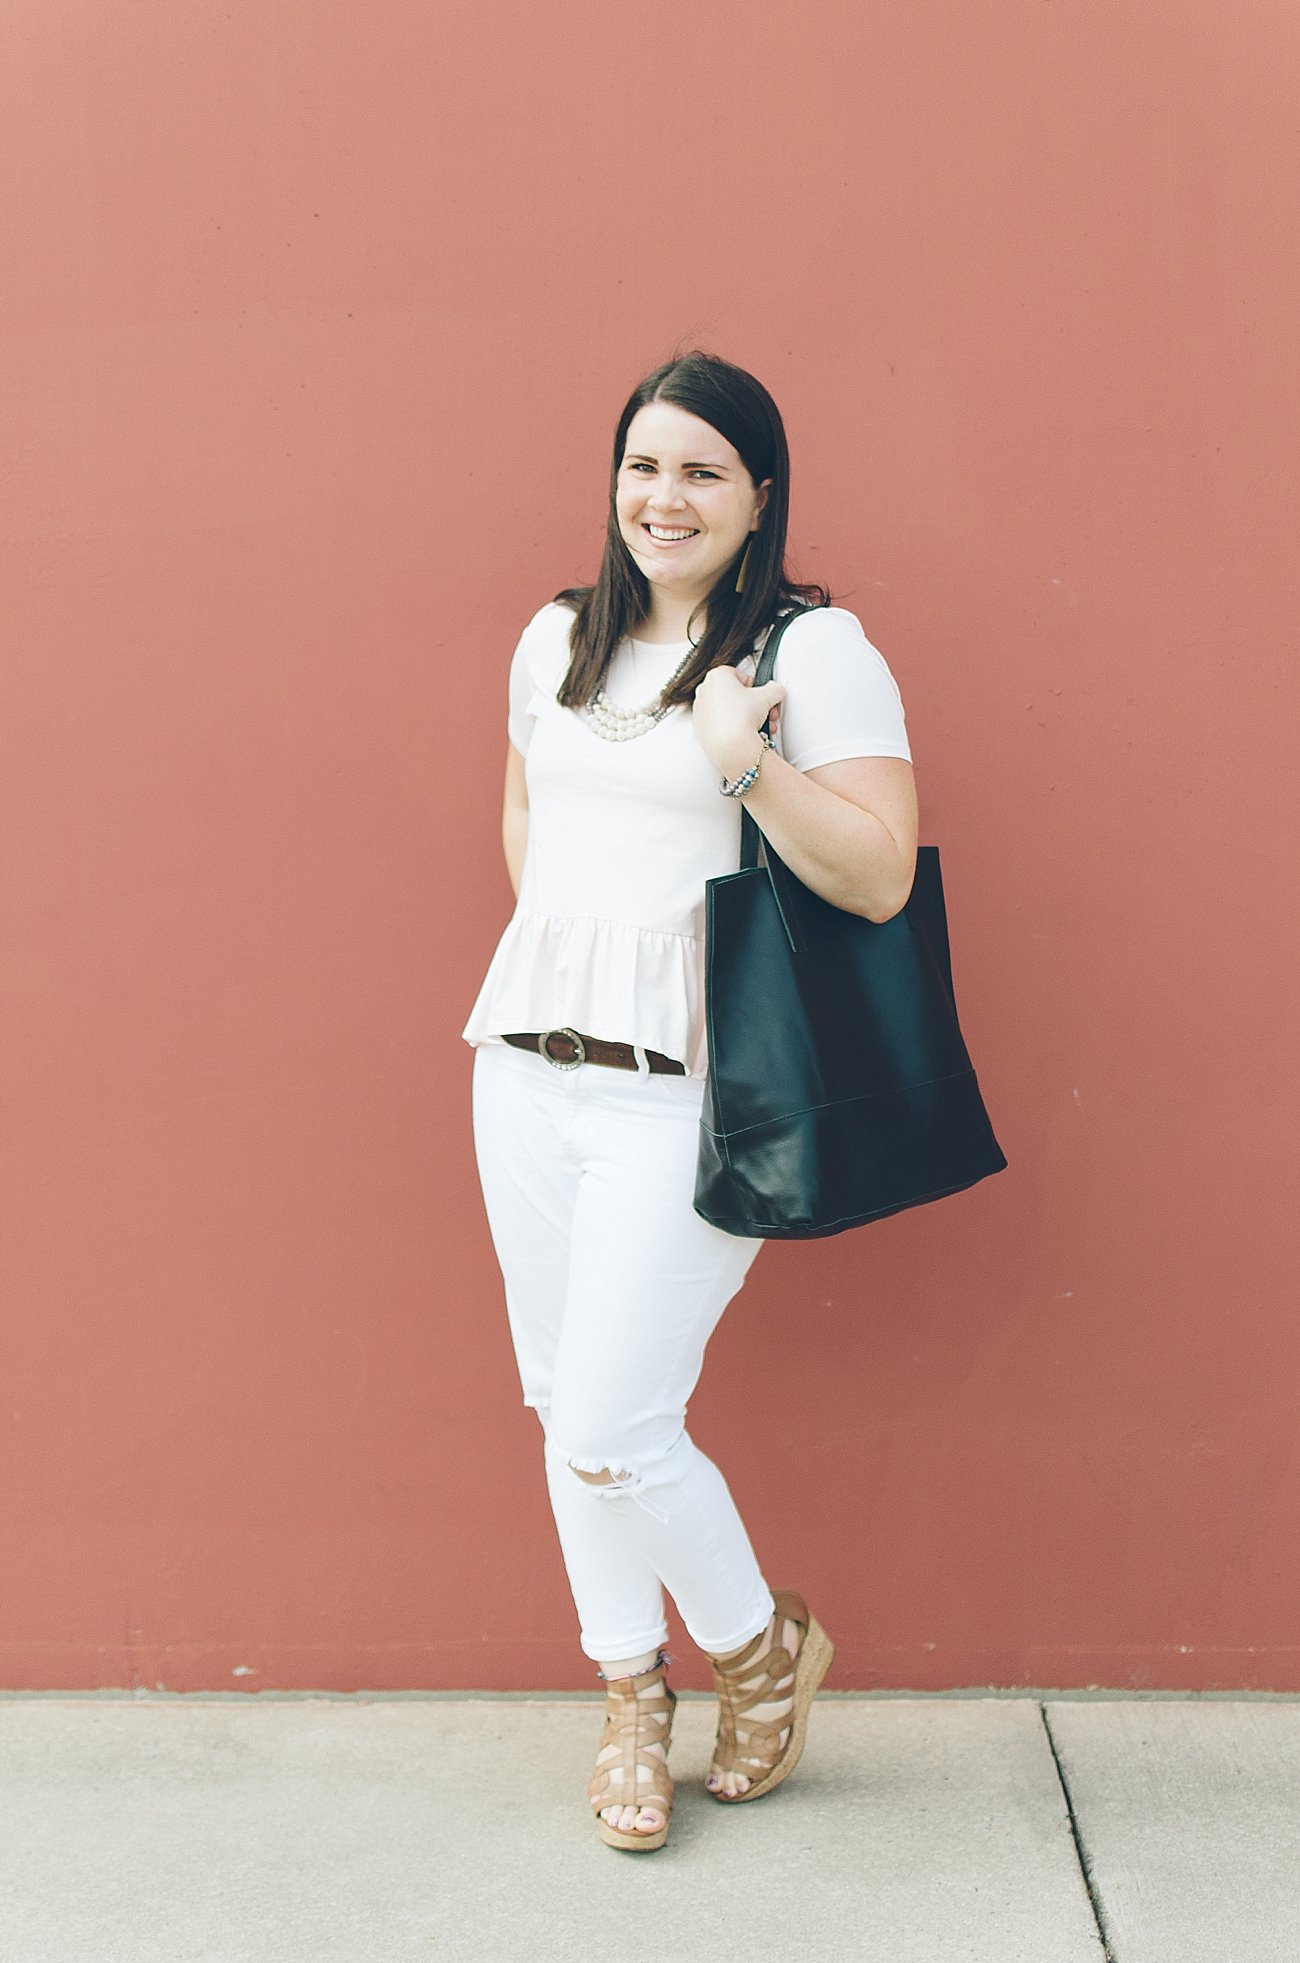 31 Bits, Elegantees Chelsea tee, white jeans, Shop Wearwell tote - ethical fashion blogger (10) - Is it Okay to Wear White After Labor Day? by NC ethical fashion blogger Still Being Molly